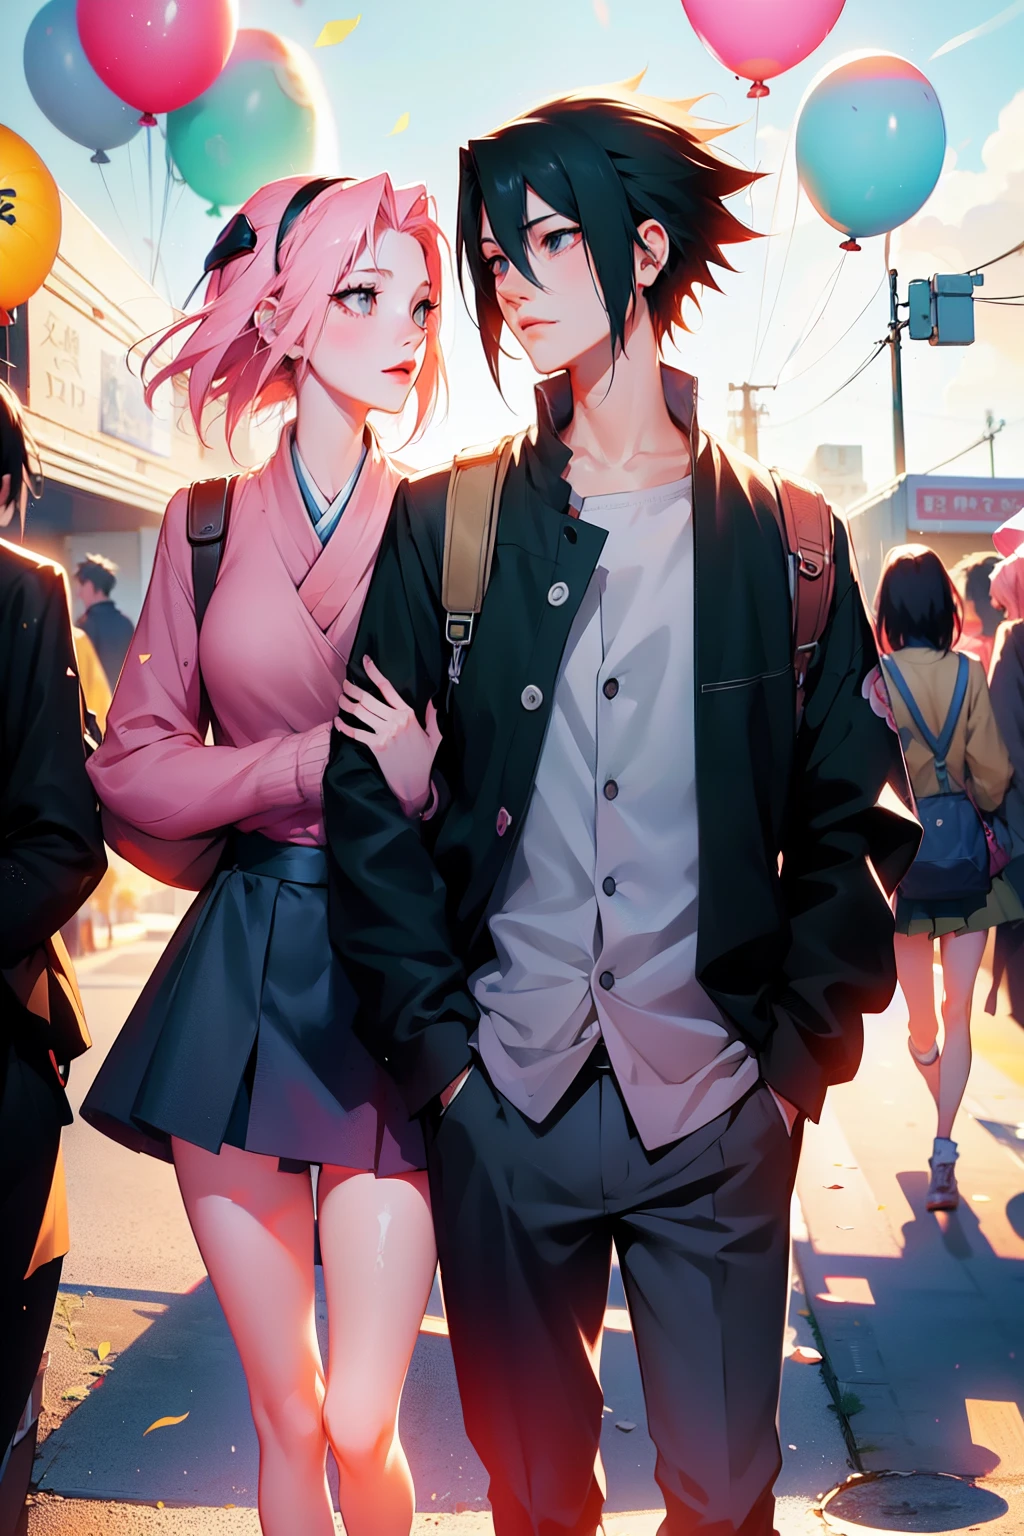 sasusaku. Sasuke Uchiha, a tall man with black hair and wearing his, is a student and has his hands in his pockets. Sakura, a thin woman with pink hair, has her hands in her pockets. best quality, adorable, ultra-detailed, illustration, complex, detailed, extremely detailed, detailed face, soft light, soft focus, perfect face. In love, illustration. two people, couple, festival, balloons, lovers